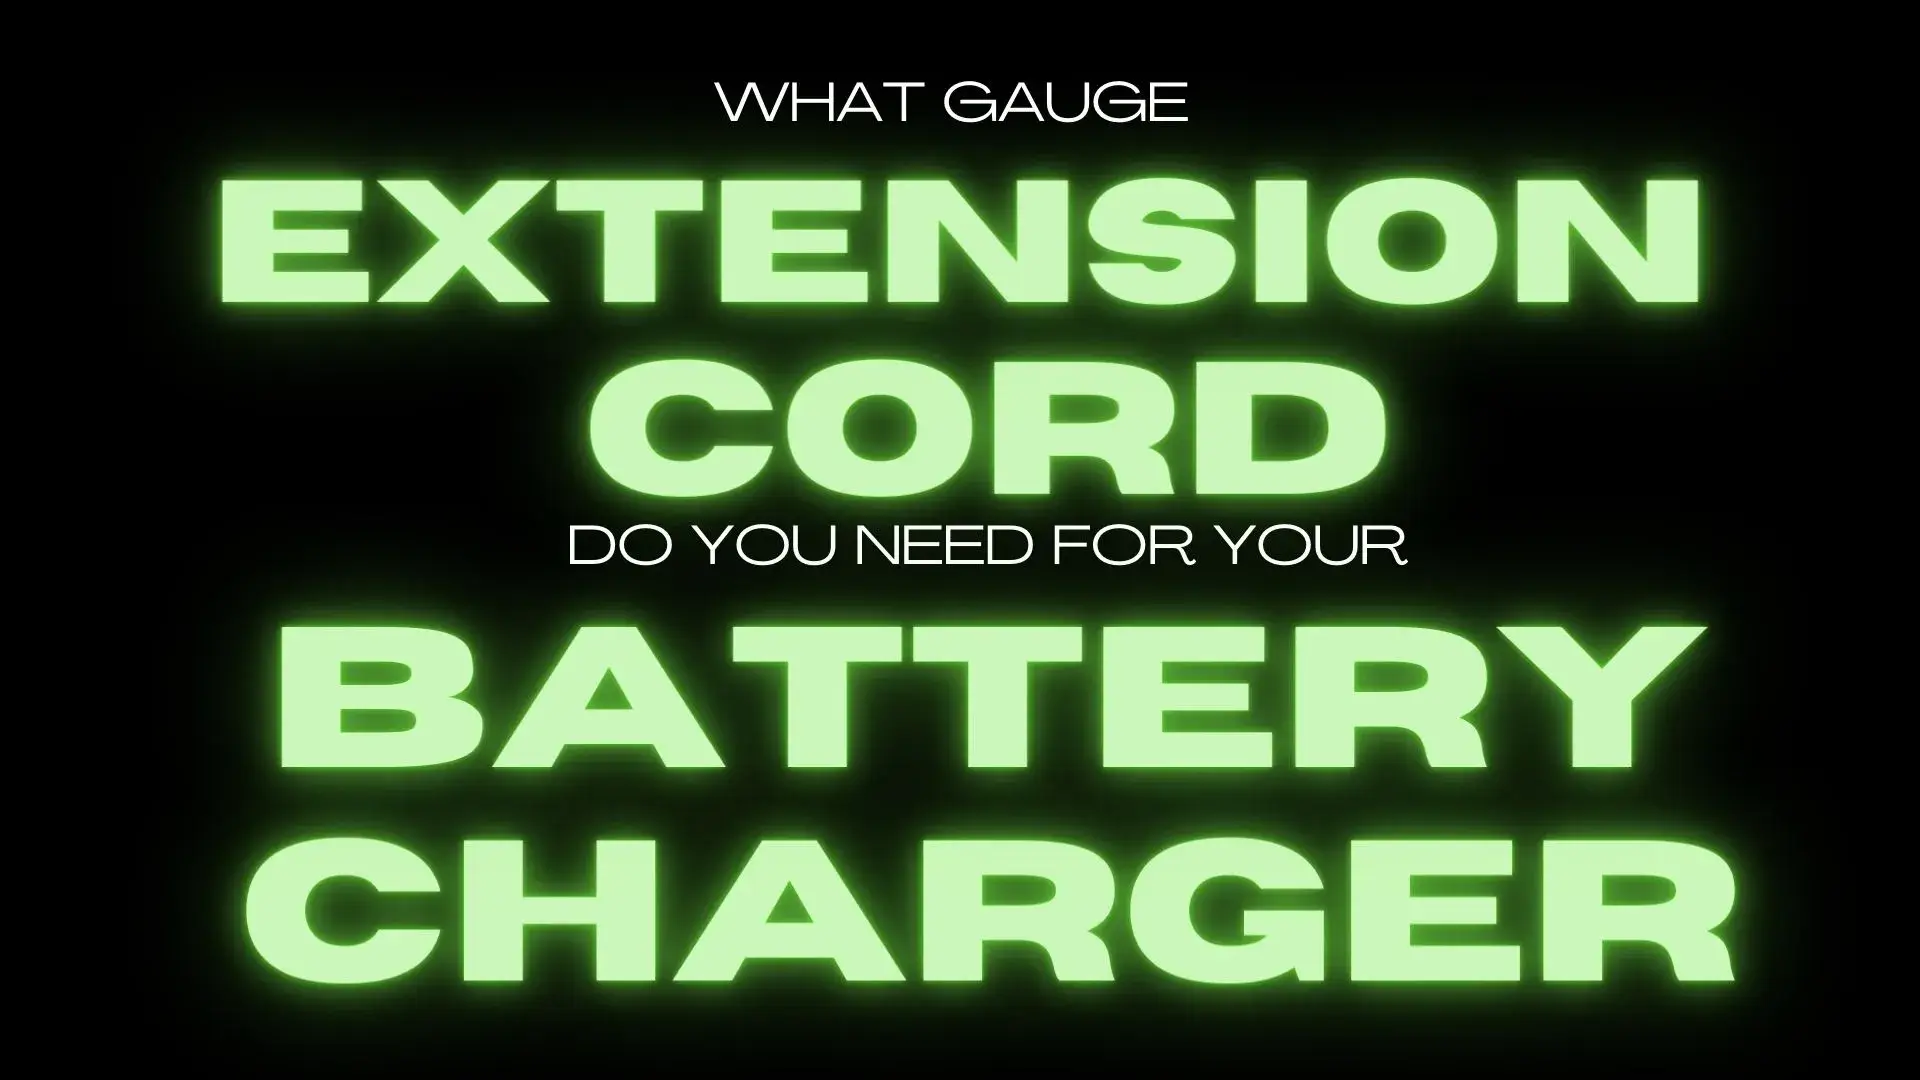 What Gauge Extension Cord Do You Need for Your Battery Charger